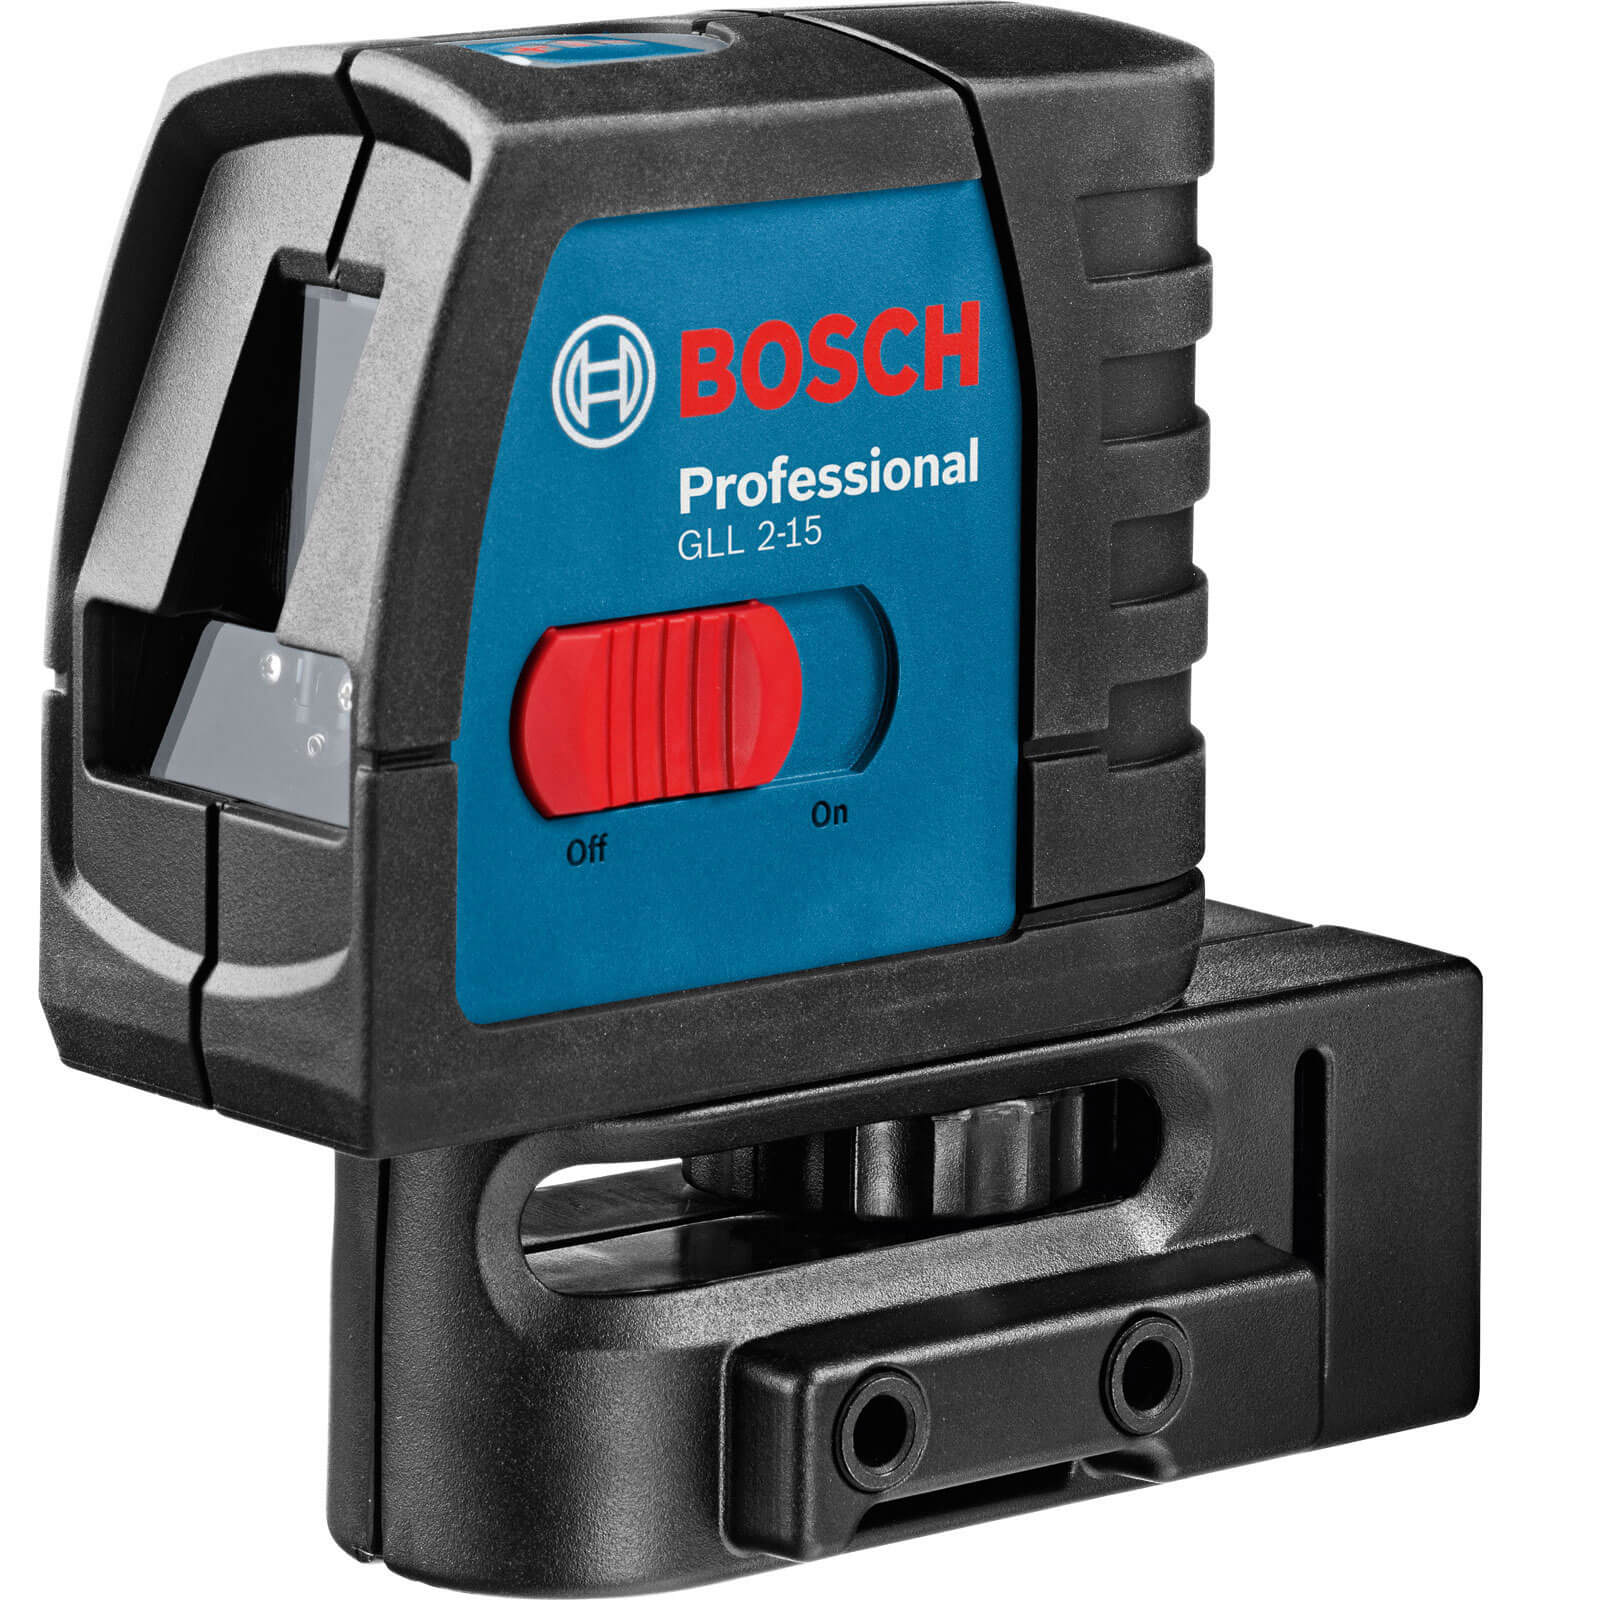 Photo of Bosch Gll 2-15 Cross Line Laser Level And Bm3 Wall Mount